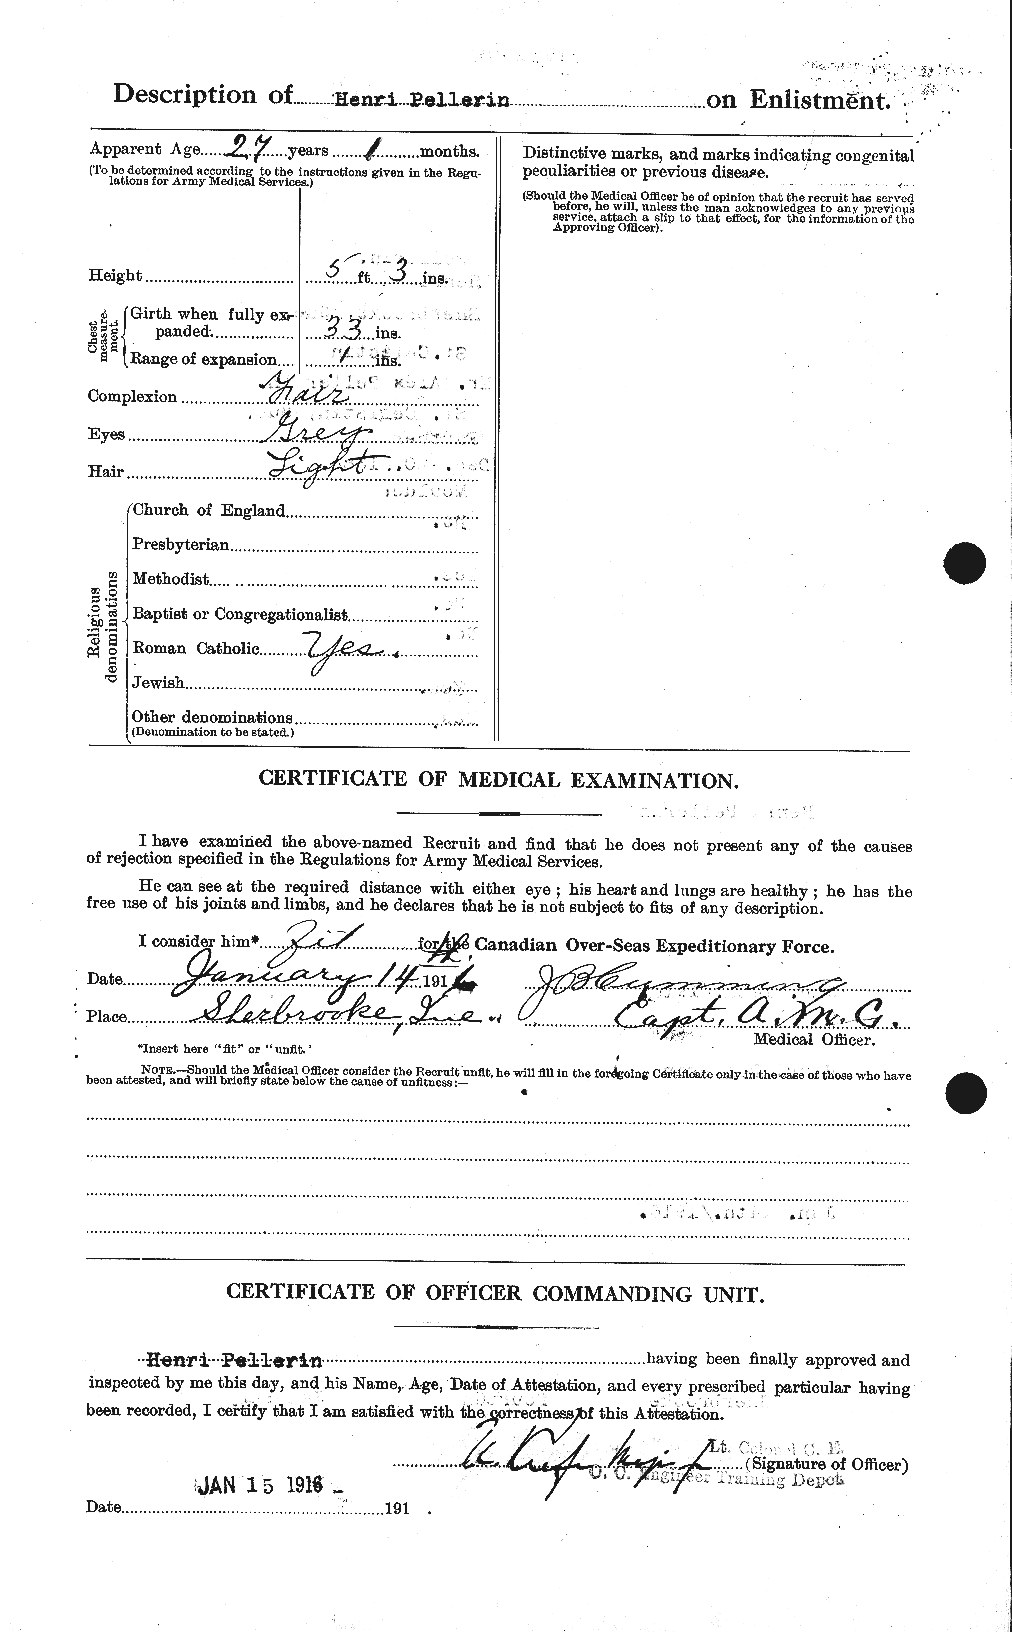 Personnel Records of the First World War - CEF 572251b